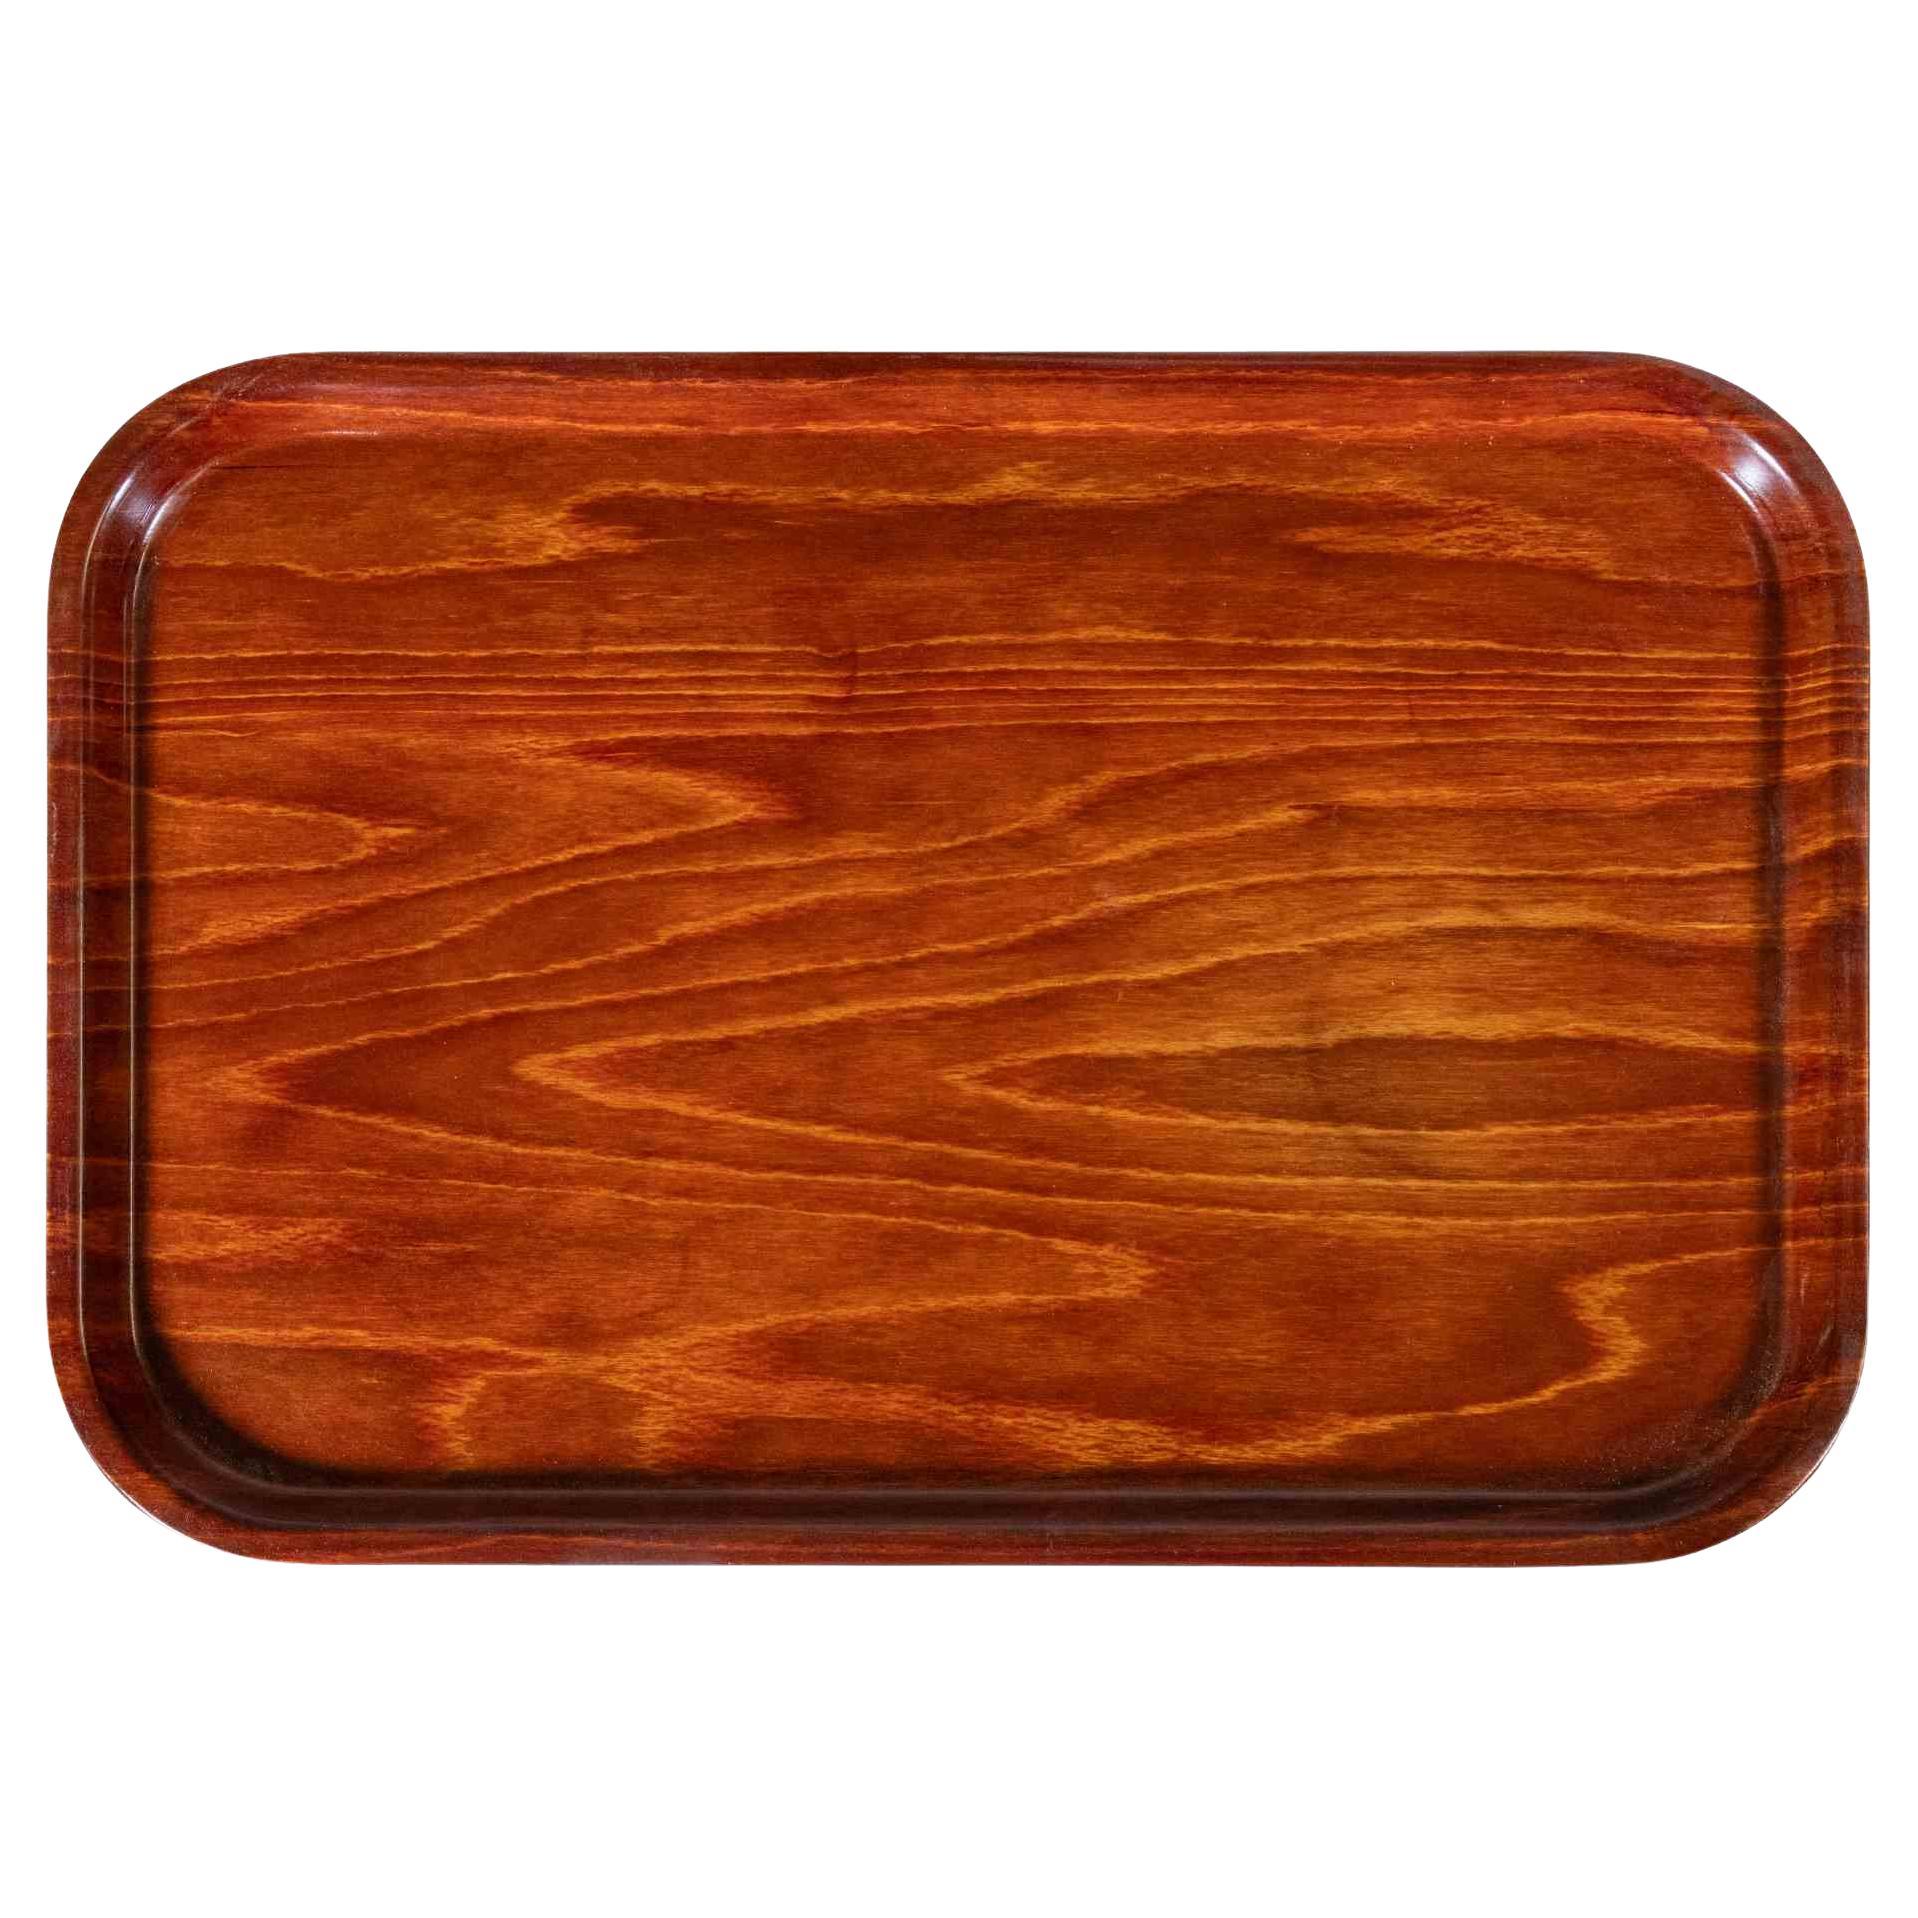 Laminated Vintage Tray by Gerling Sol-Ohligs, Italy, Mid-20th Century